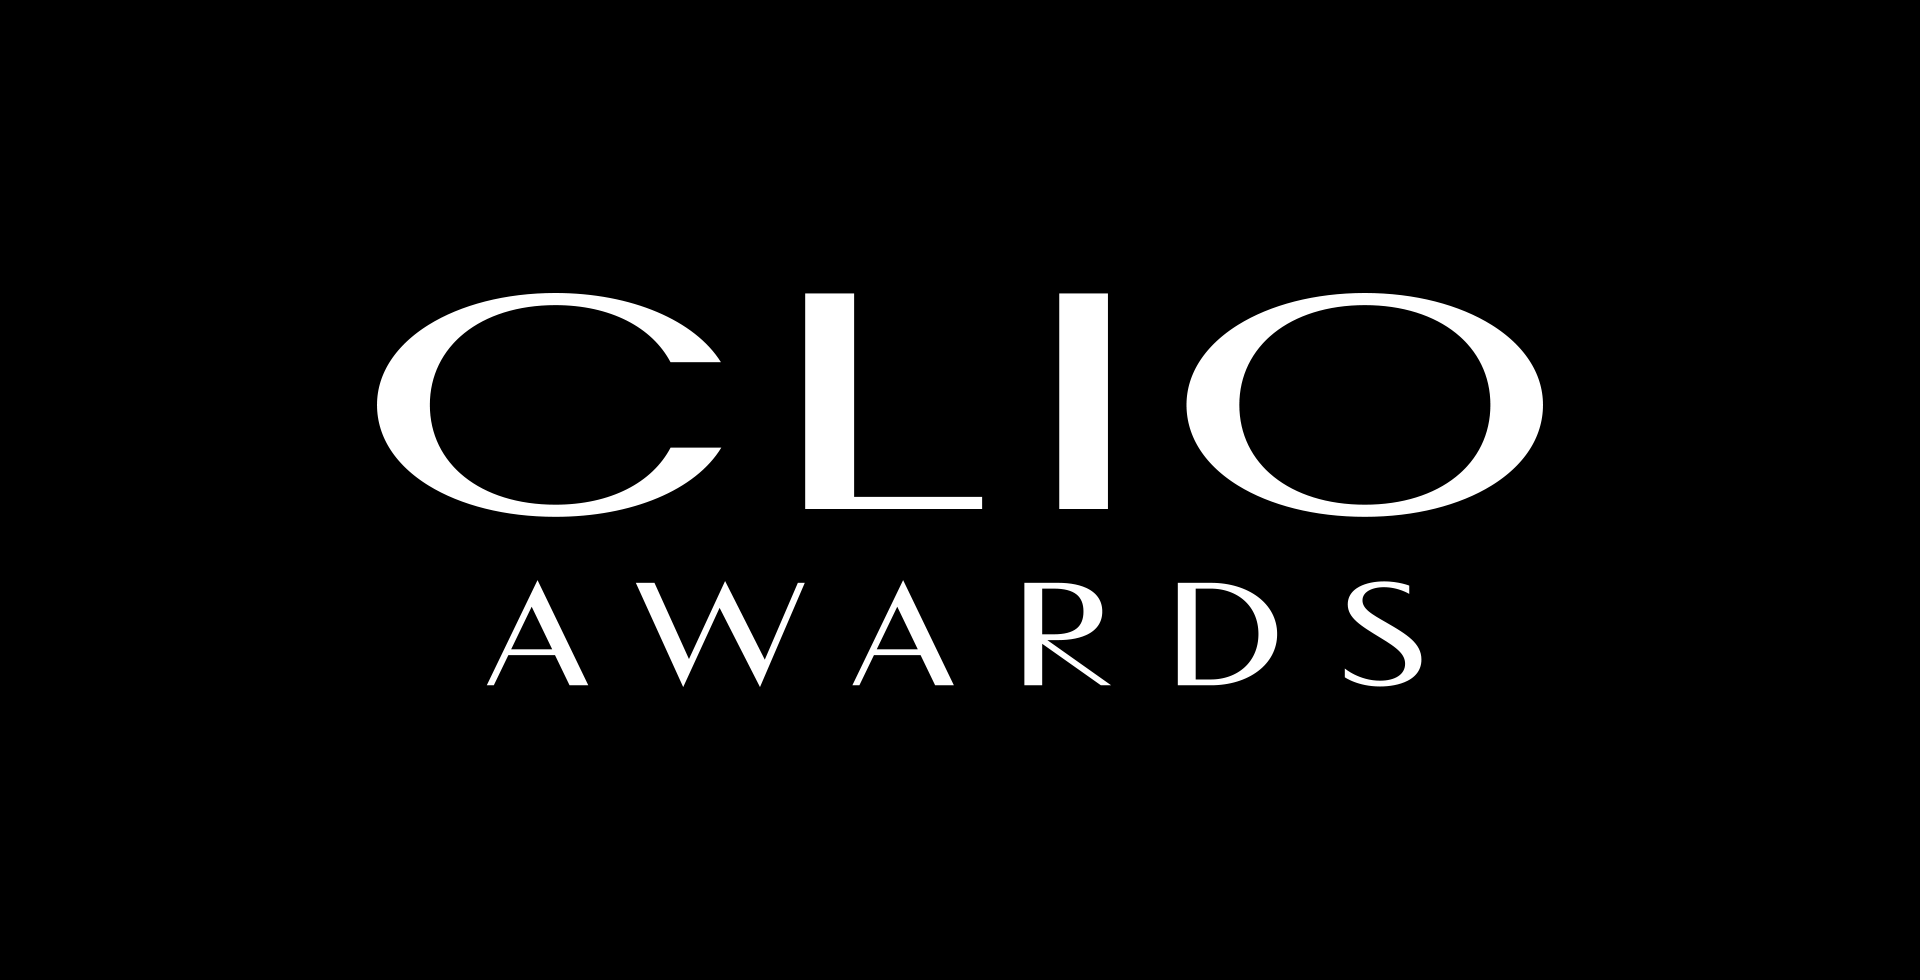 ‘Avengers Assemble’ Named to Clio Awards Shortlist